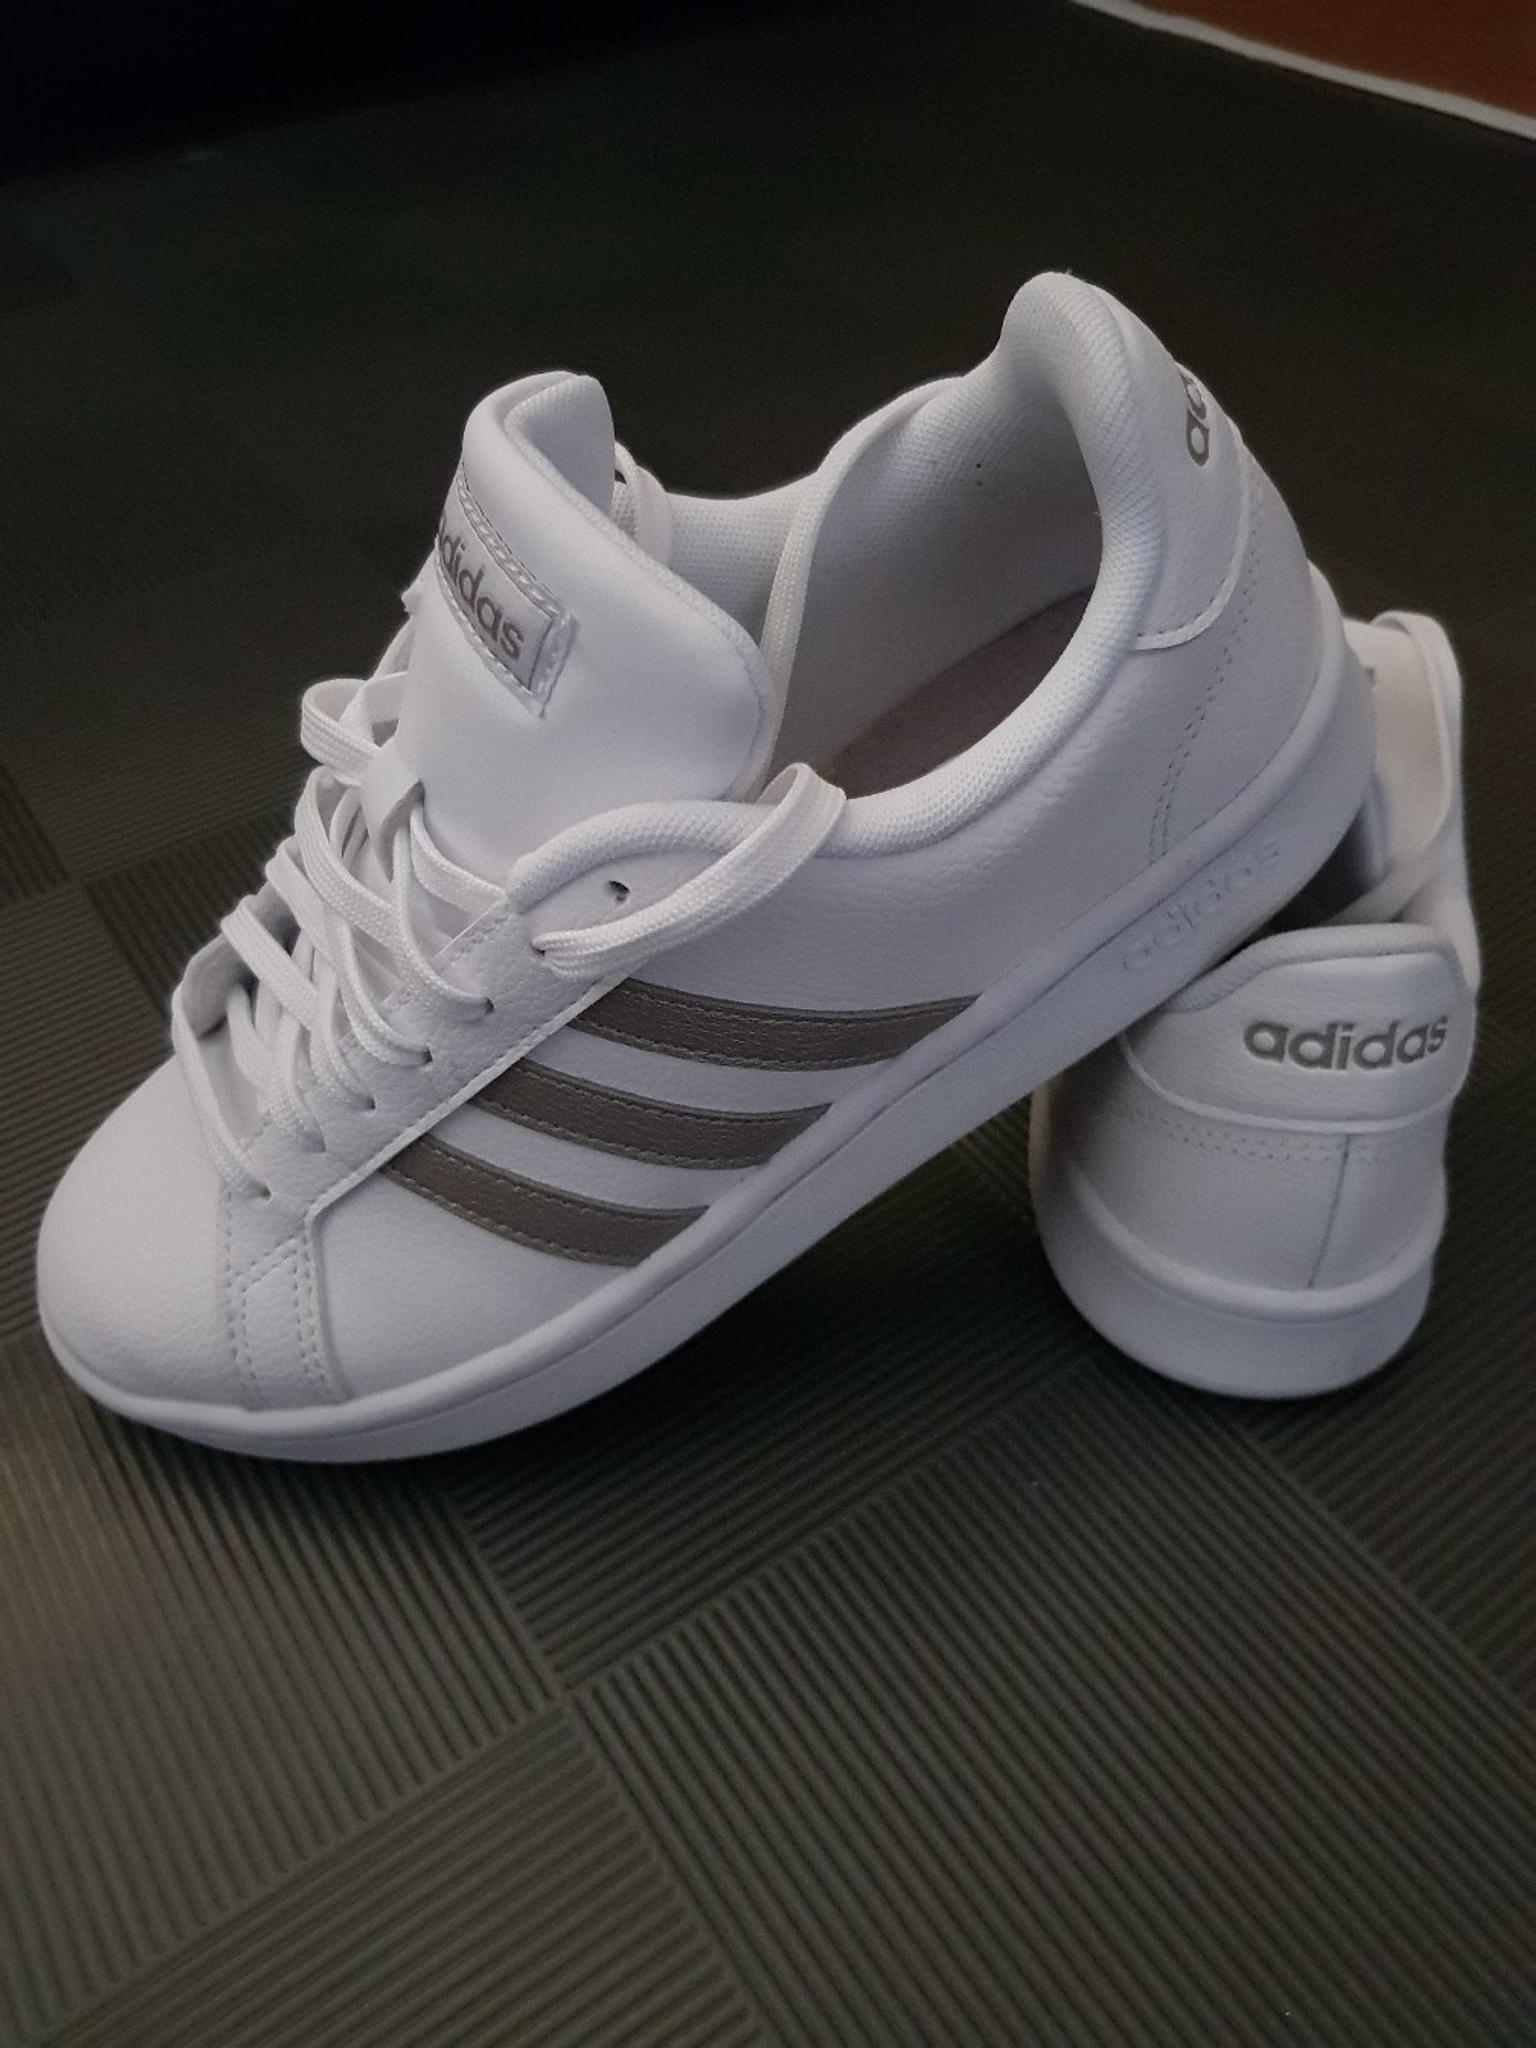 adidas trainers sport direct